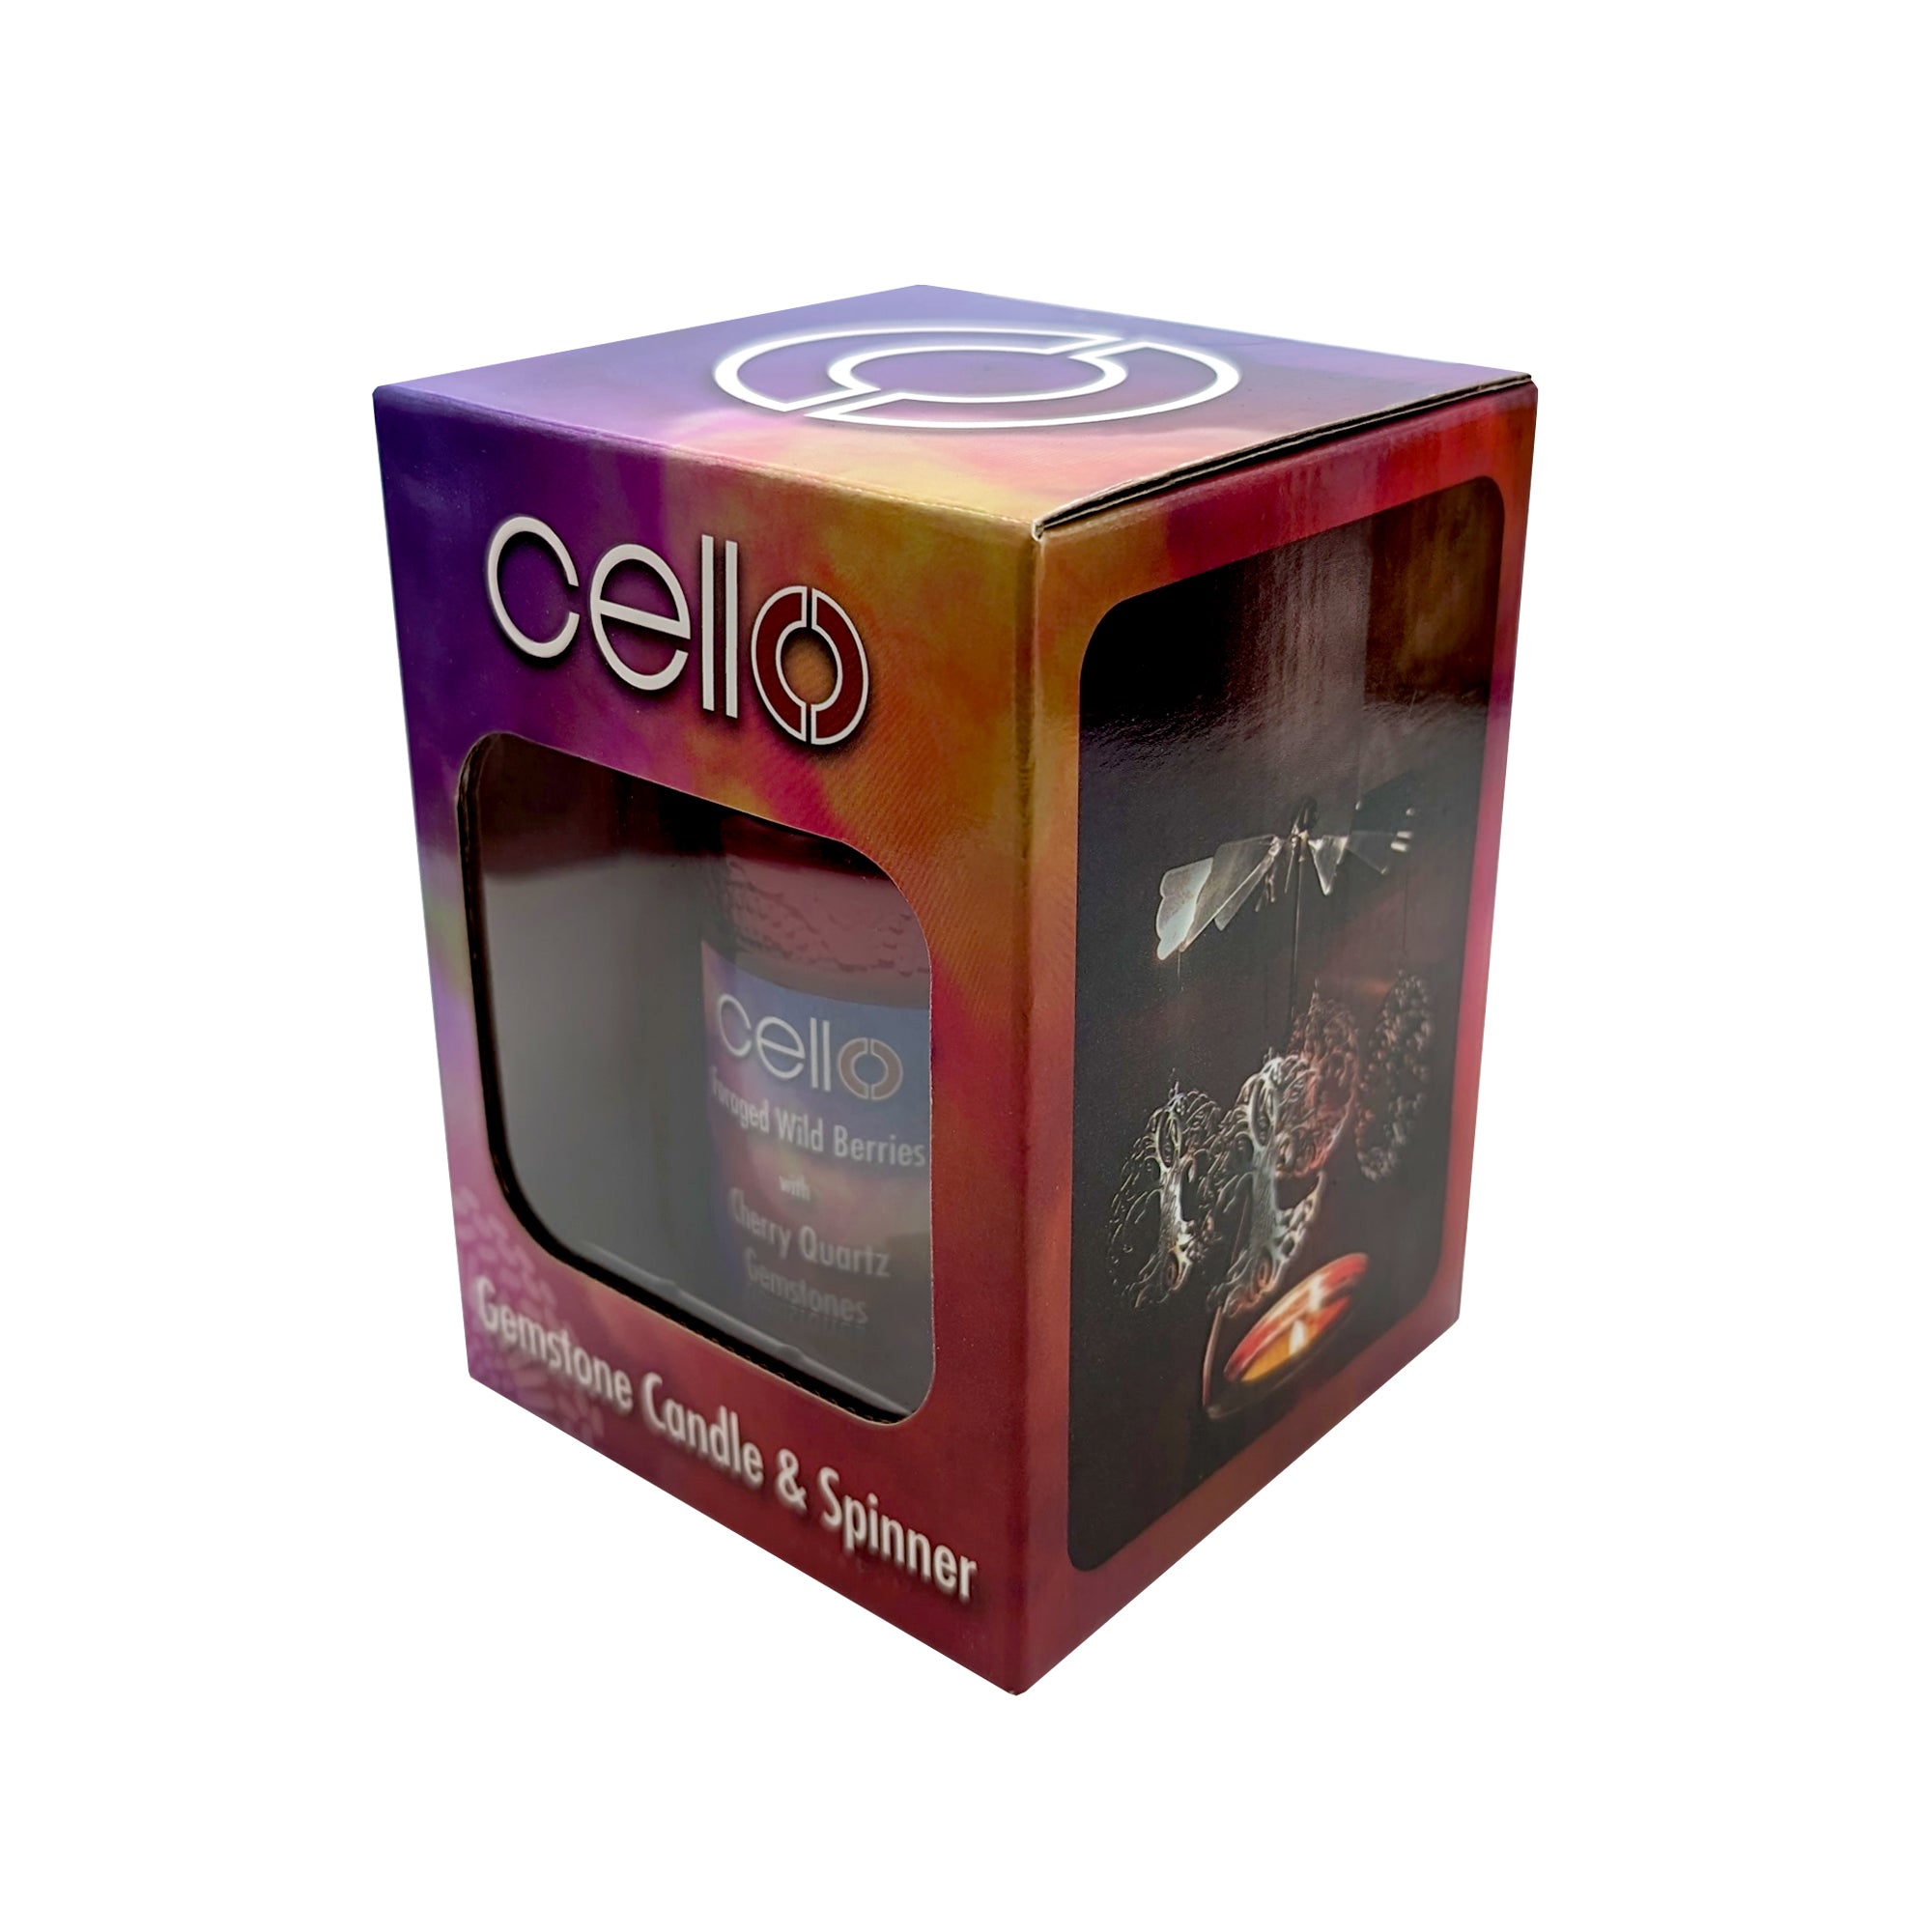 Cello - Gemstone Candle 200g with Convection Spinner - Foraged Wild Berries with Cherry Quartz